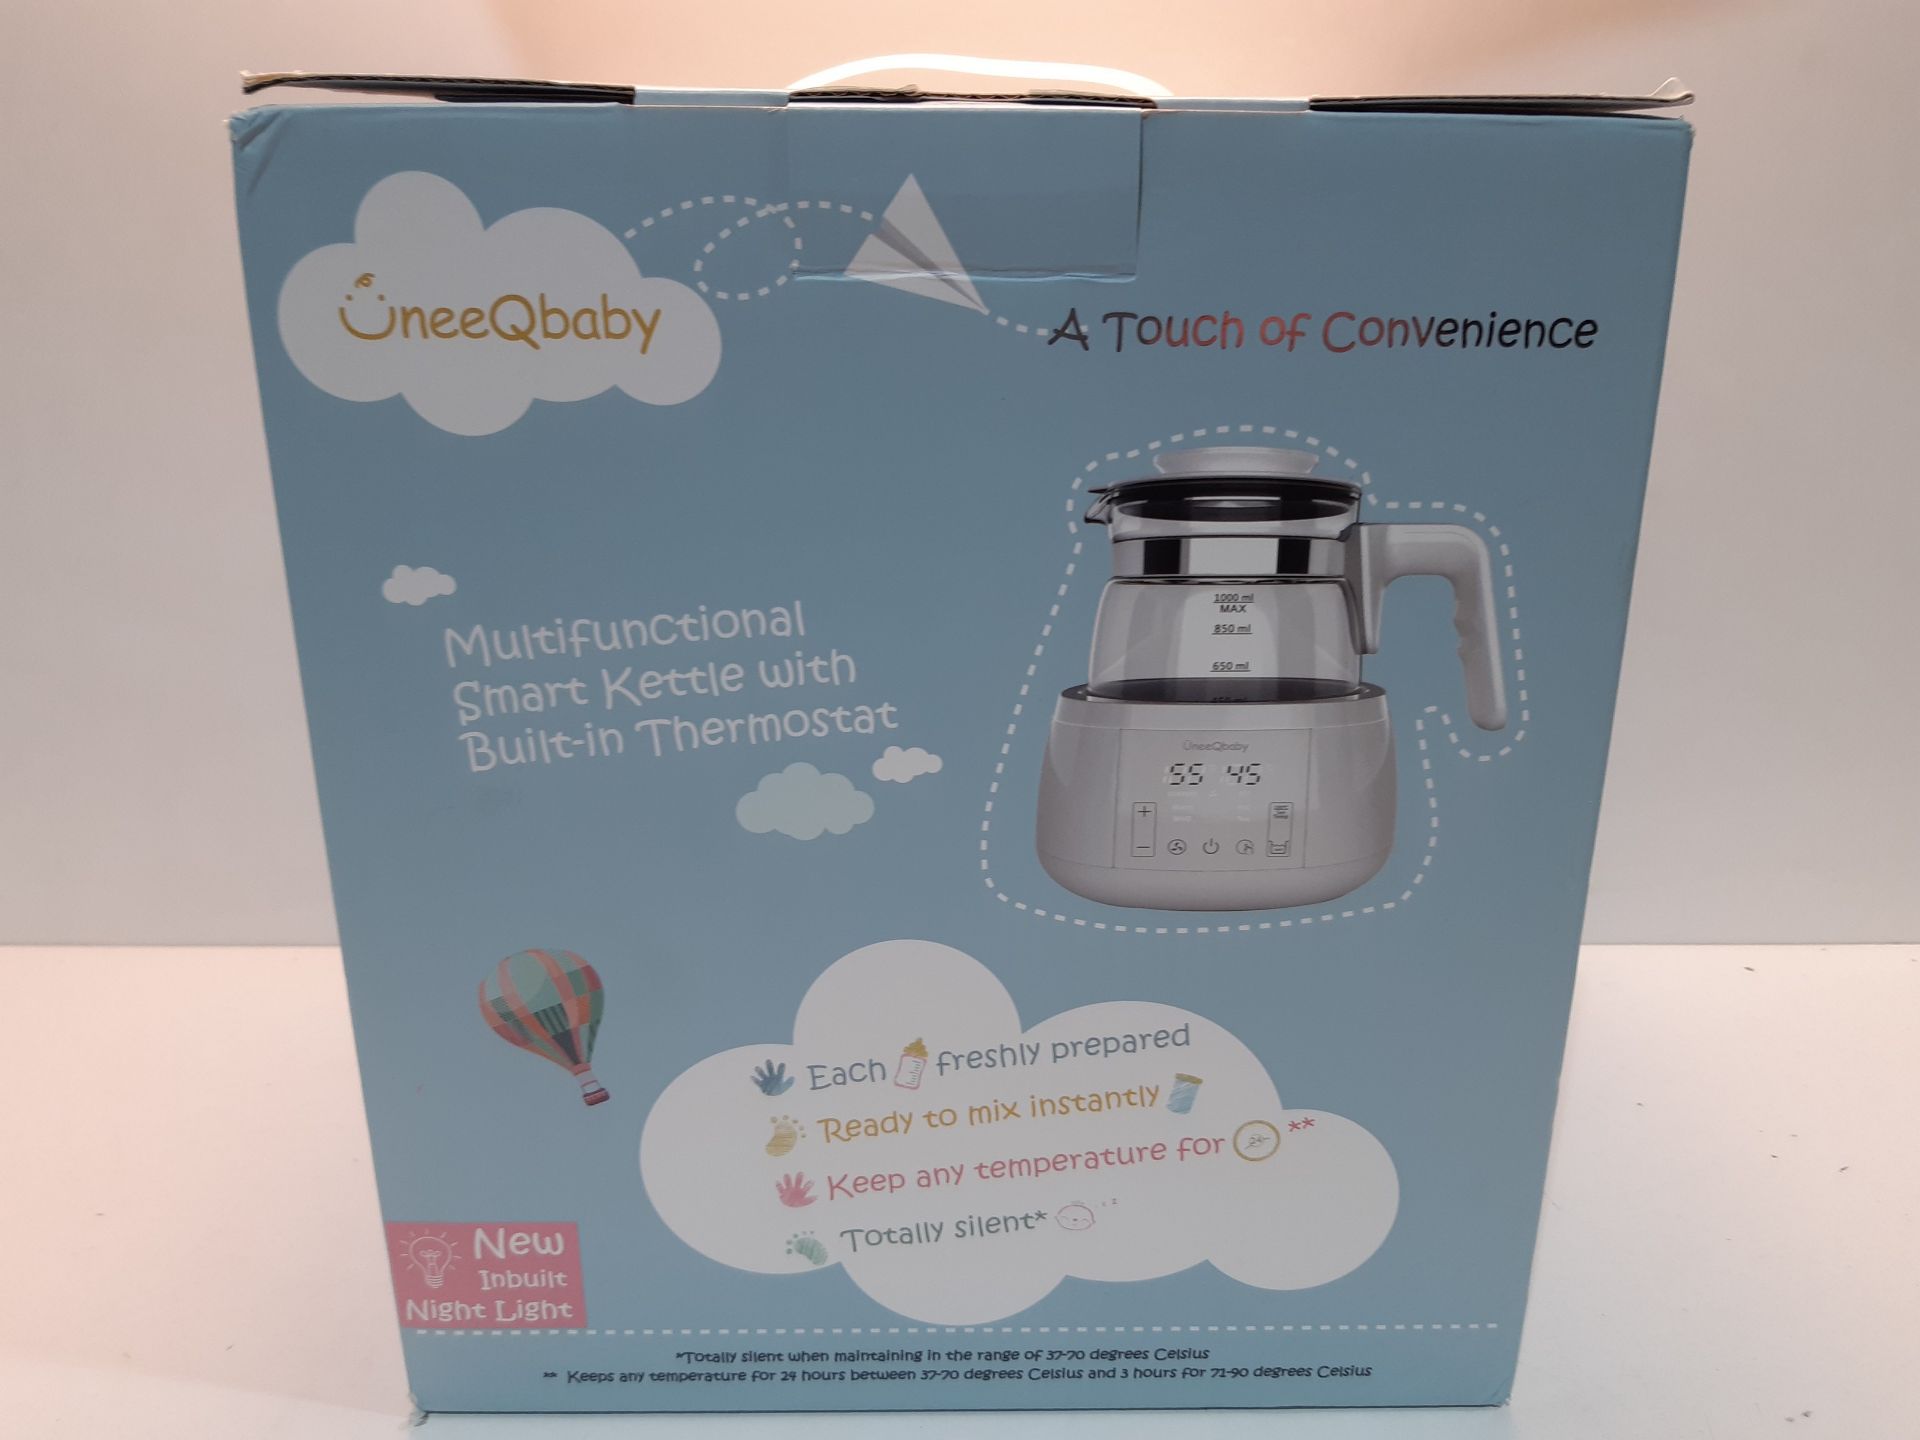 RRP £57.95 neeQbaby Baby Formula Kettle - Night Light Function with Built in Thermostat - Image 2 of 2